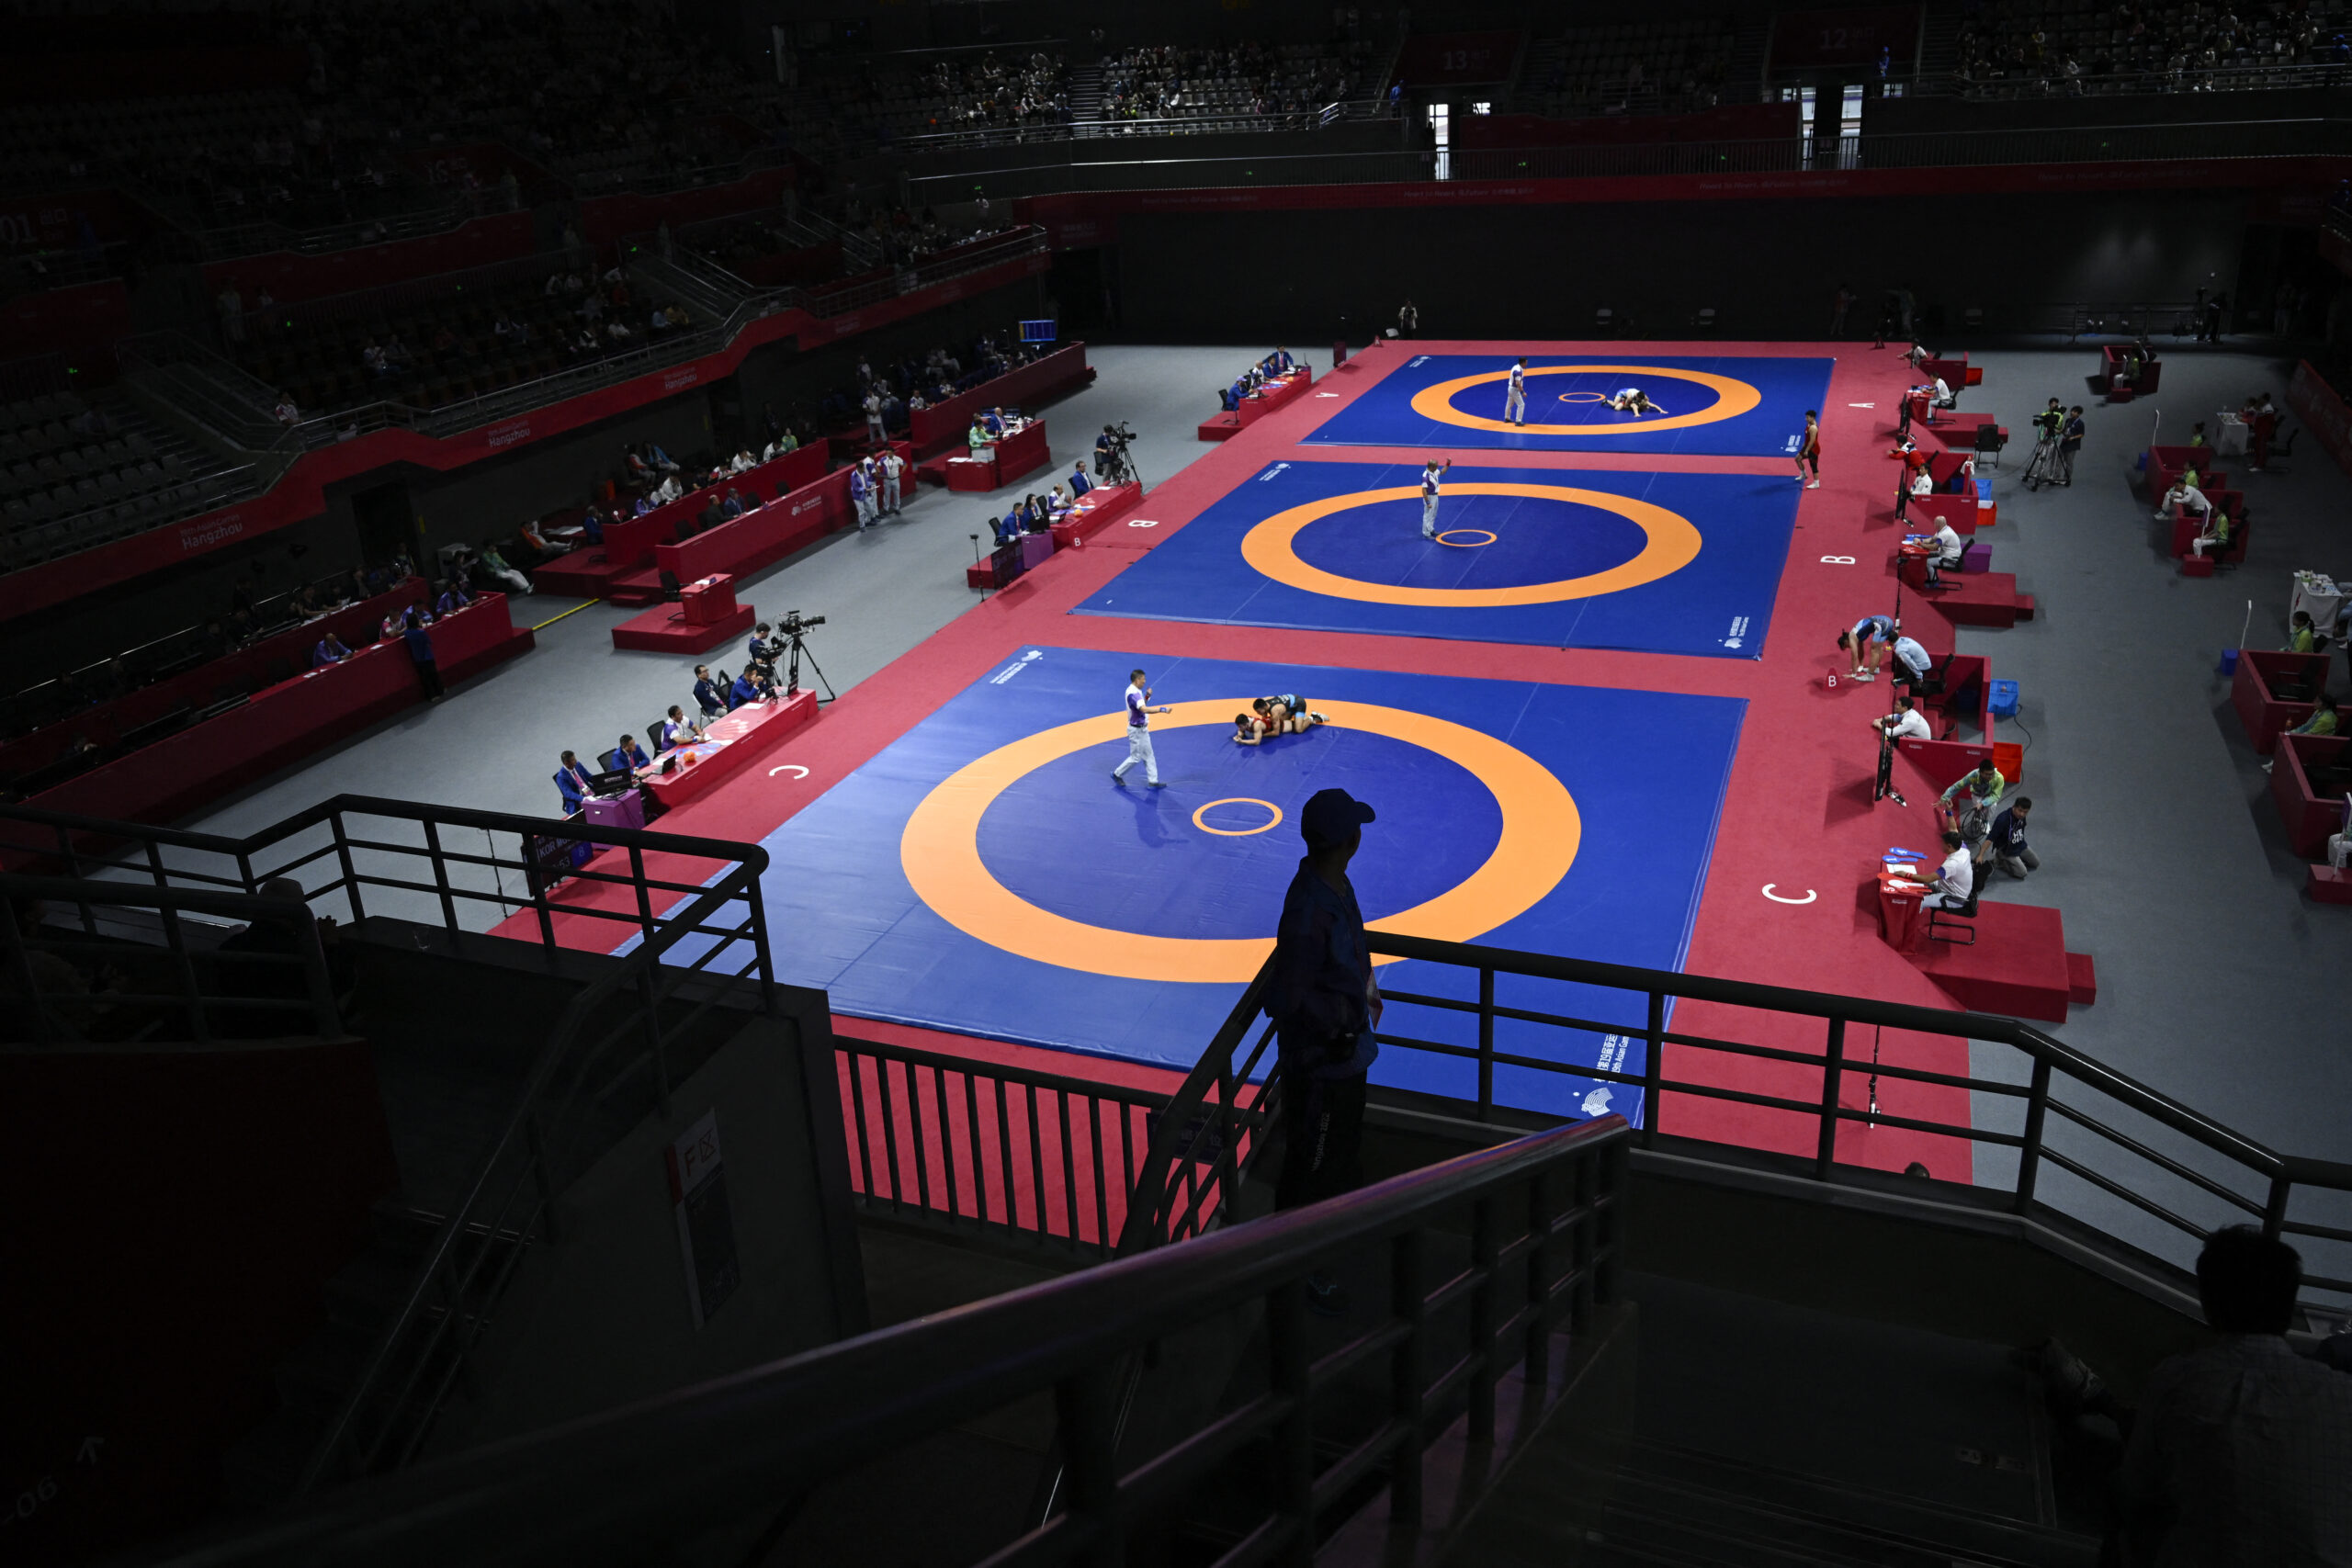 A security official keeps watch during the mens and women's freestyle wrestling matches during the 2022 Asian Games in Hangzhou in China's eastern Zhejiang province on October 6, 2023.